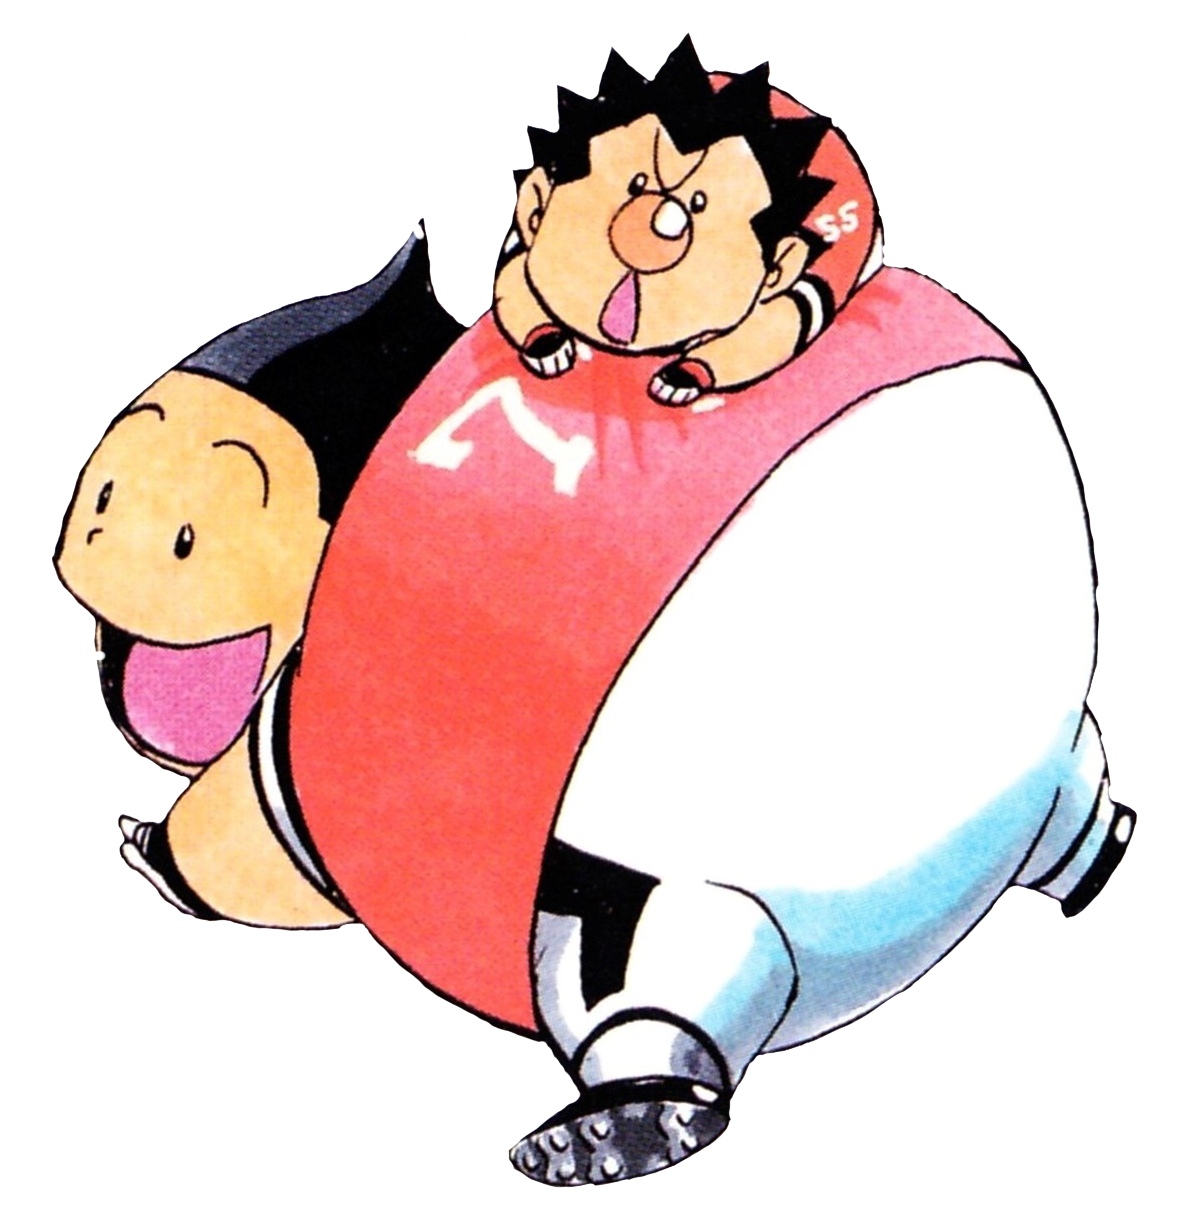 A transparent color illustration of Kurita smiling and lying on his stomach, his bottom facing the viewer. Komusubi is resting on his back and looking upwards.